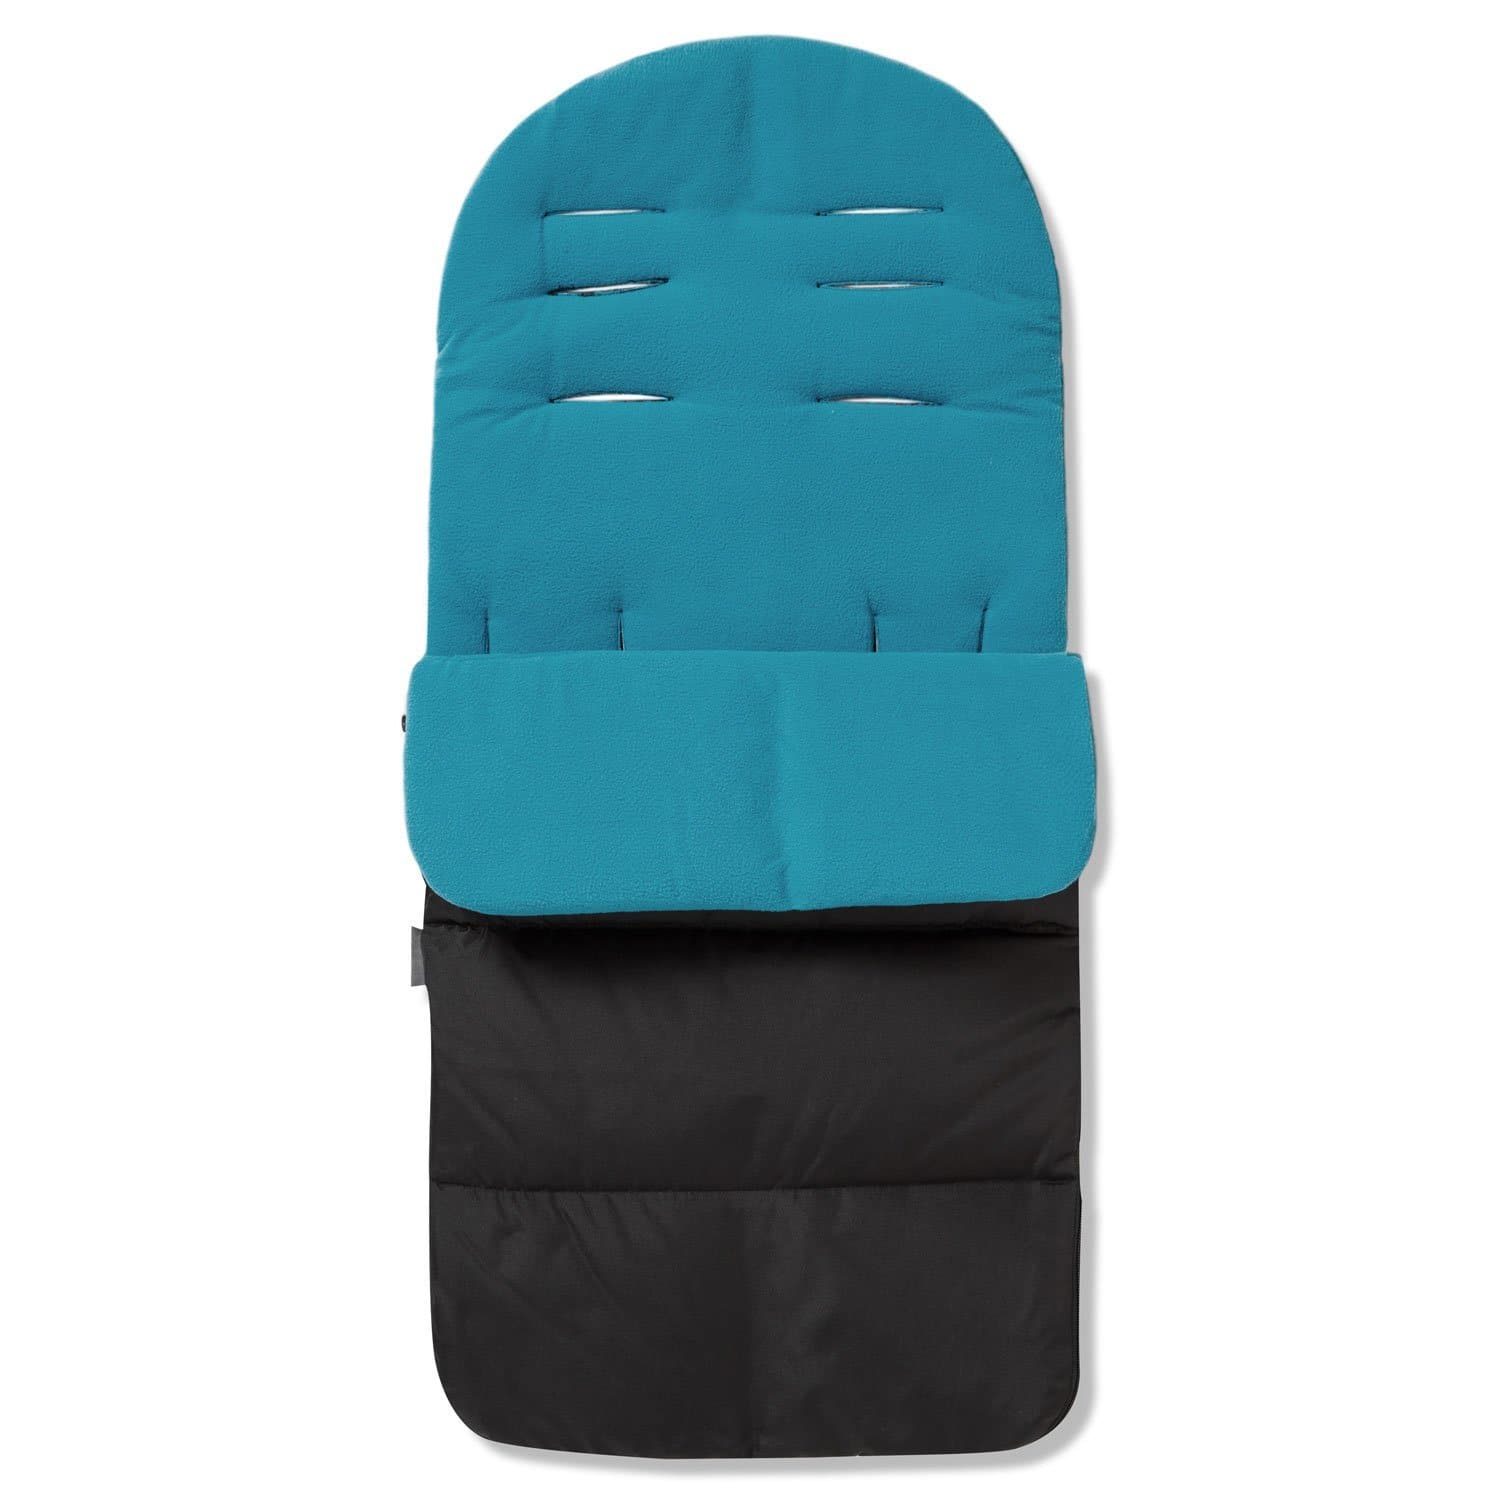 Premium Footmuff / Cosy Toes Compatible with Baby Weavers - Ocean Blue / Fits All Models | For Your Little One